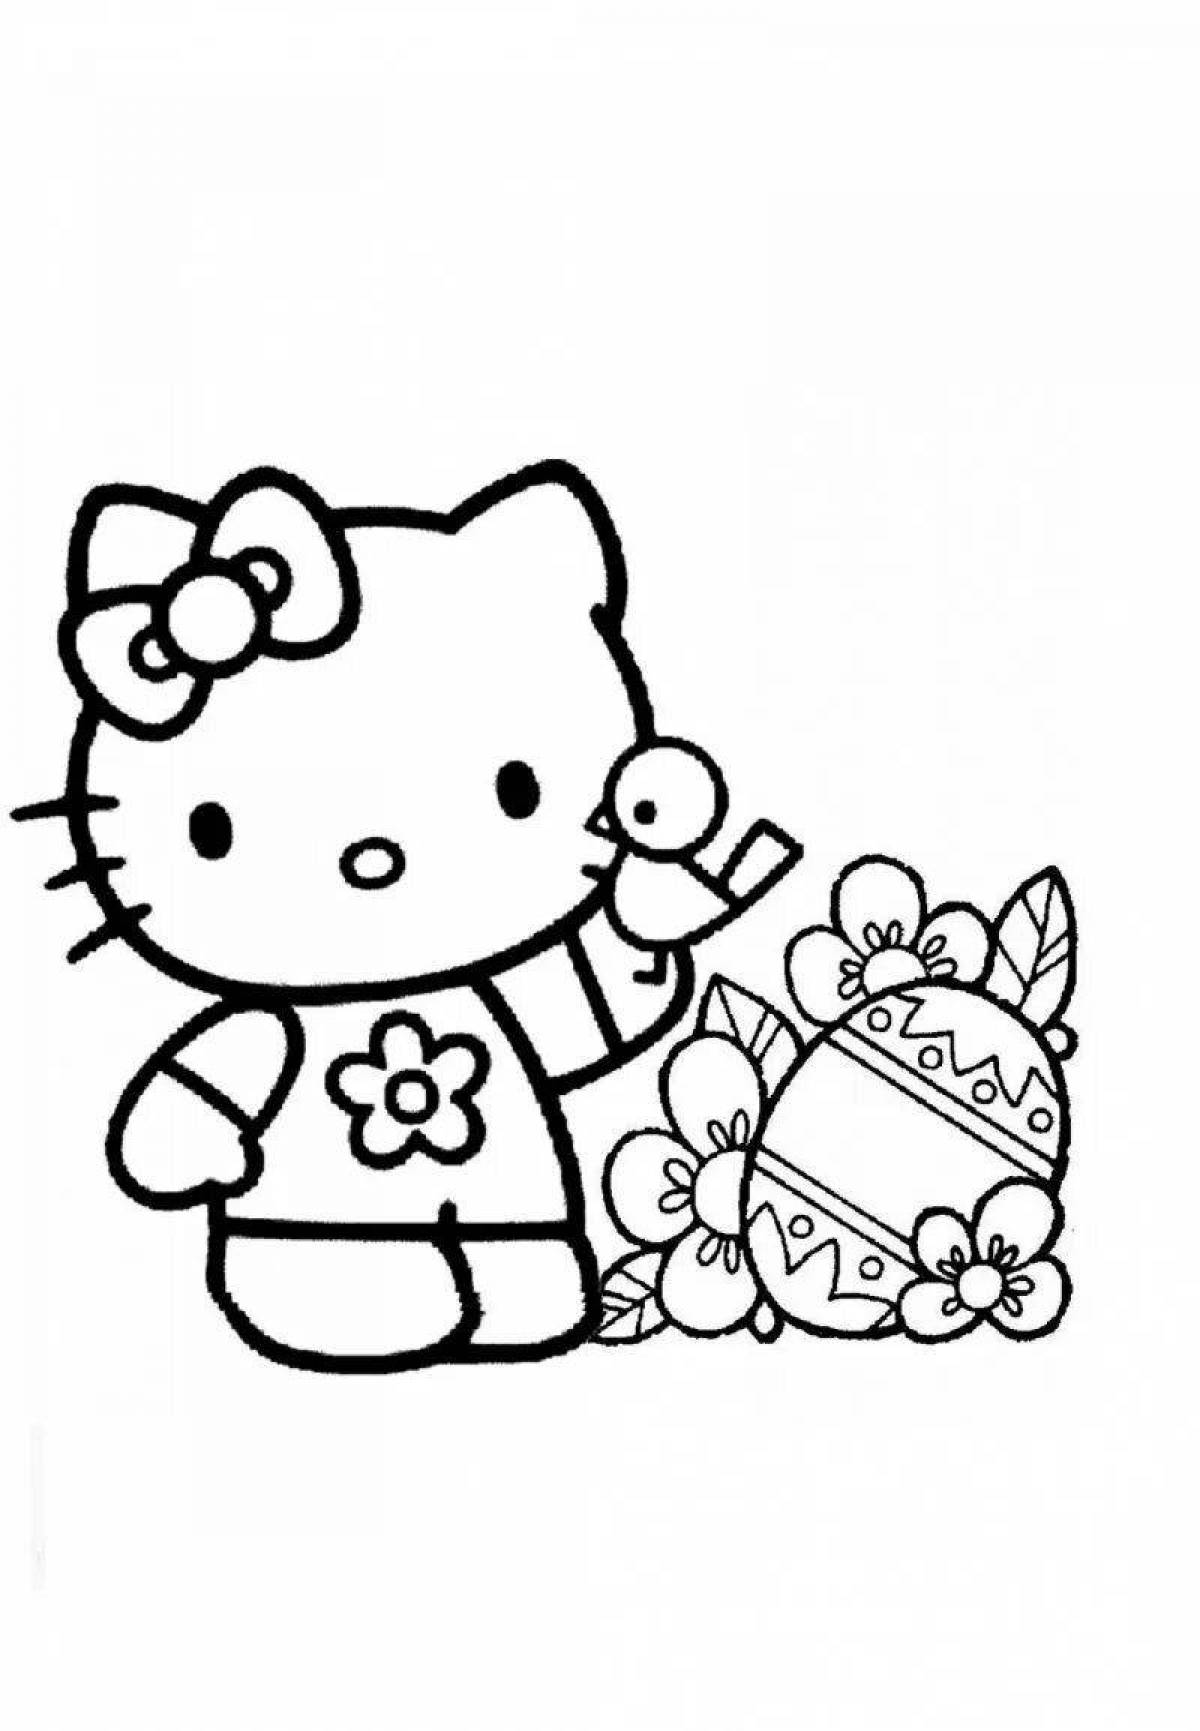 Kitty chick live coloring